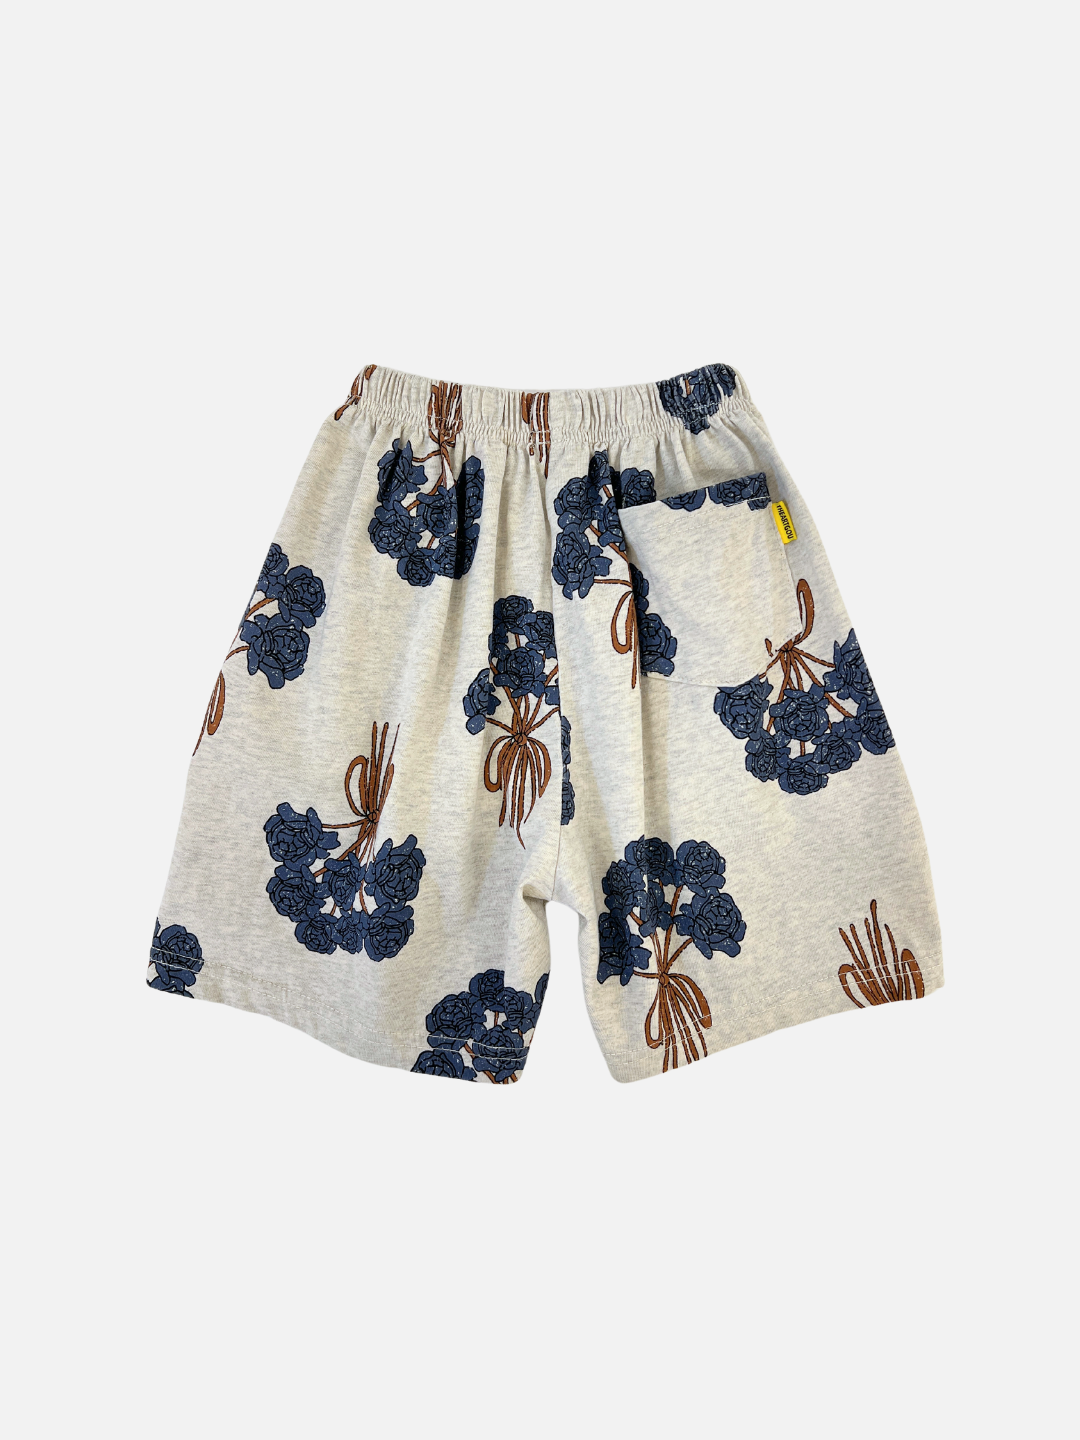 White Melange | Back view of the kids' Bouquet Shorts. warm gray cotton fabric with an all-over navy roses bouquet print. Back pocket on the right side.